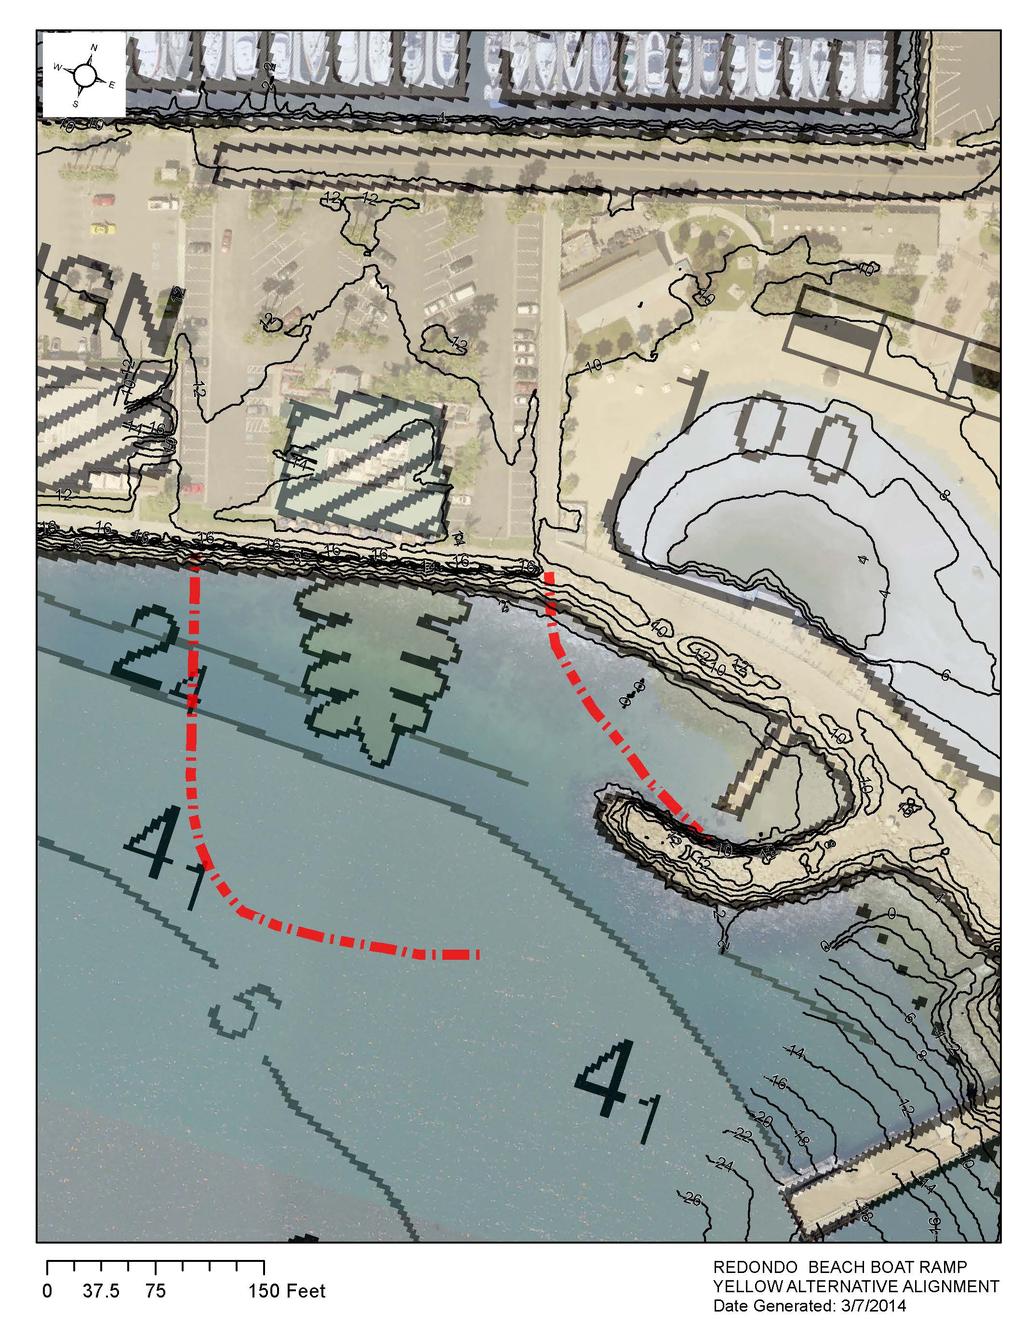 The bathymetry for the water area adjacent to the proposed launch ramp site is shown in Figure 5.